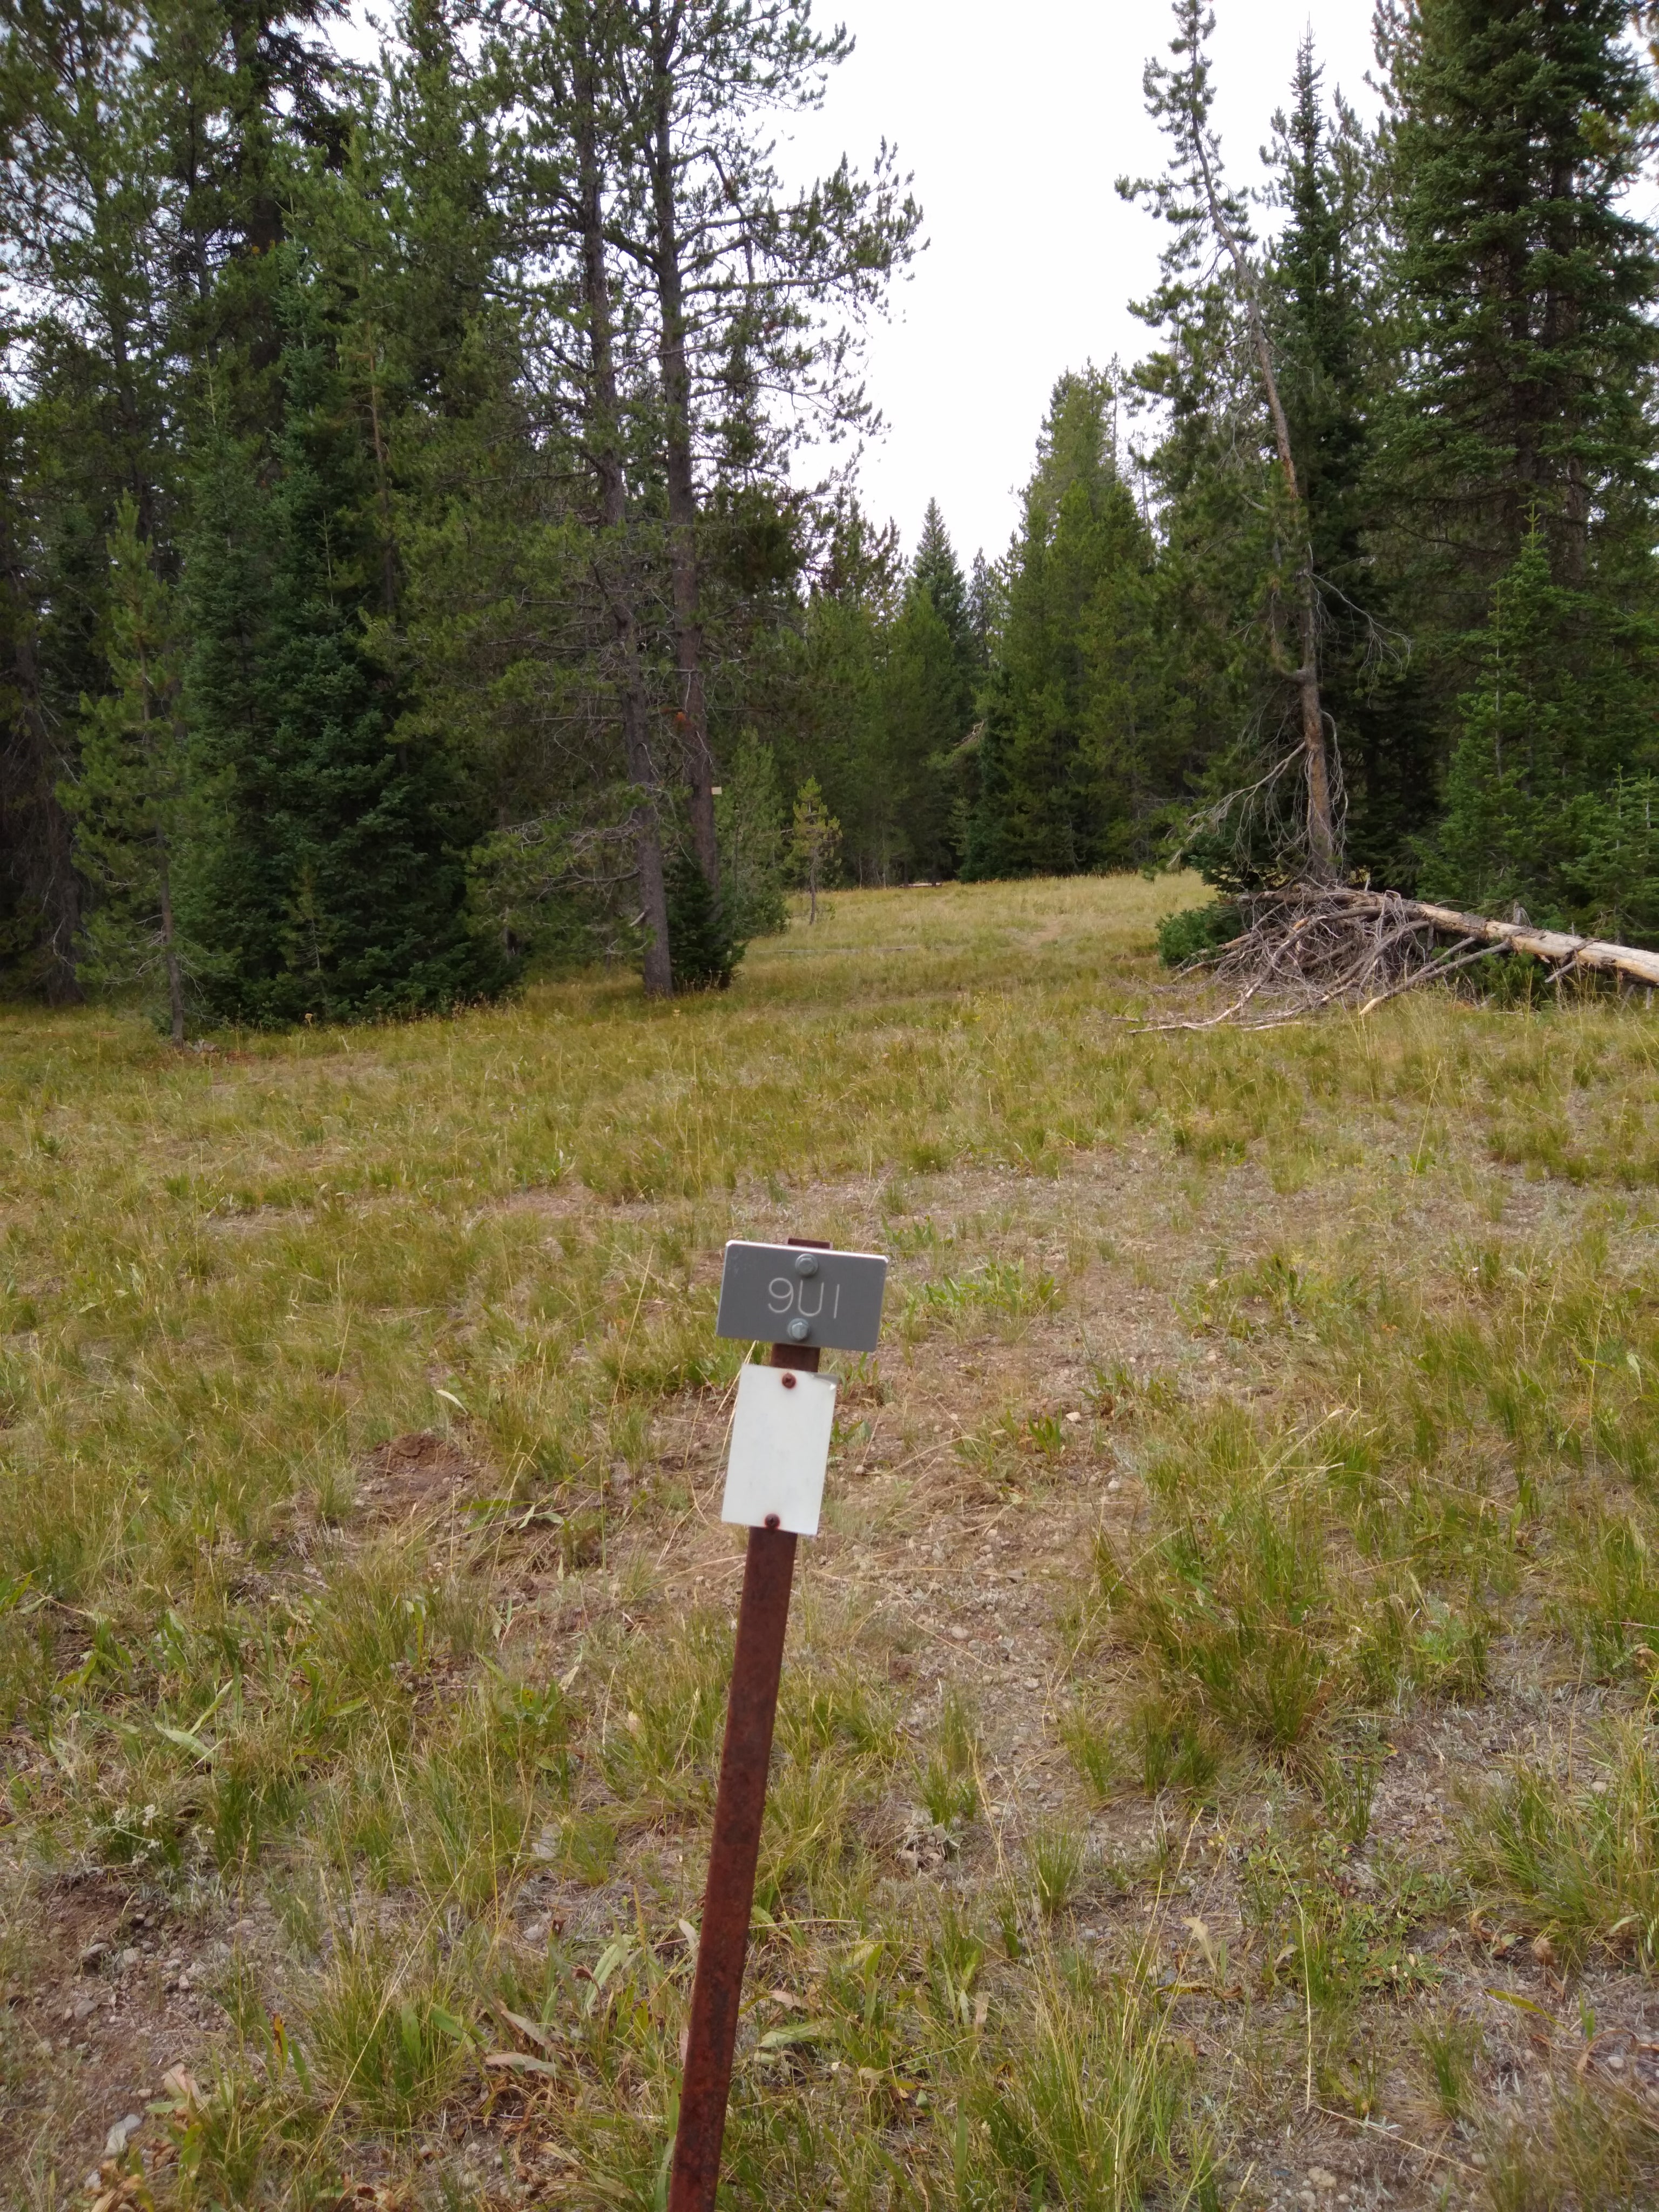 Camper submitted image from 9U1 Yellowstone National Park Backcountry — Yellowstone National Park - 1